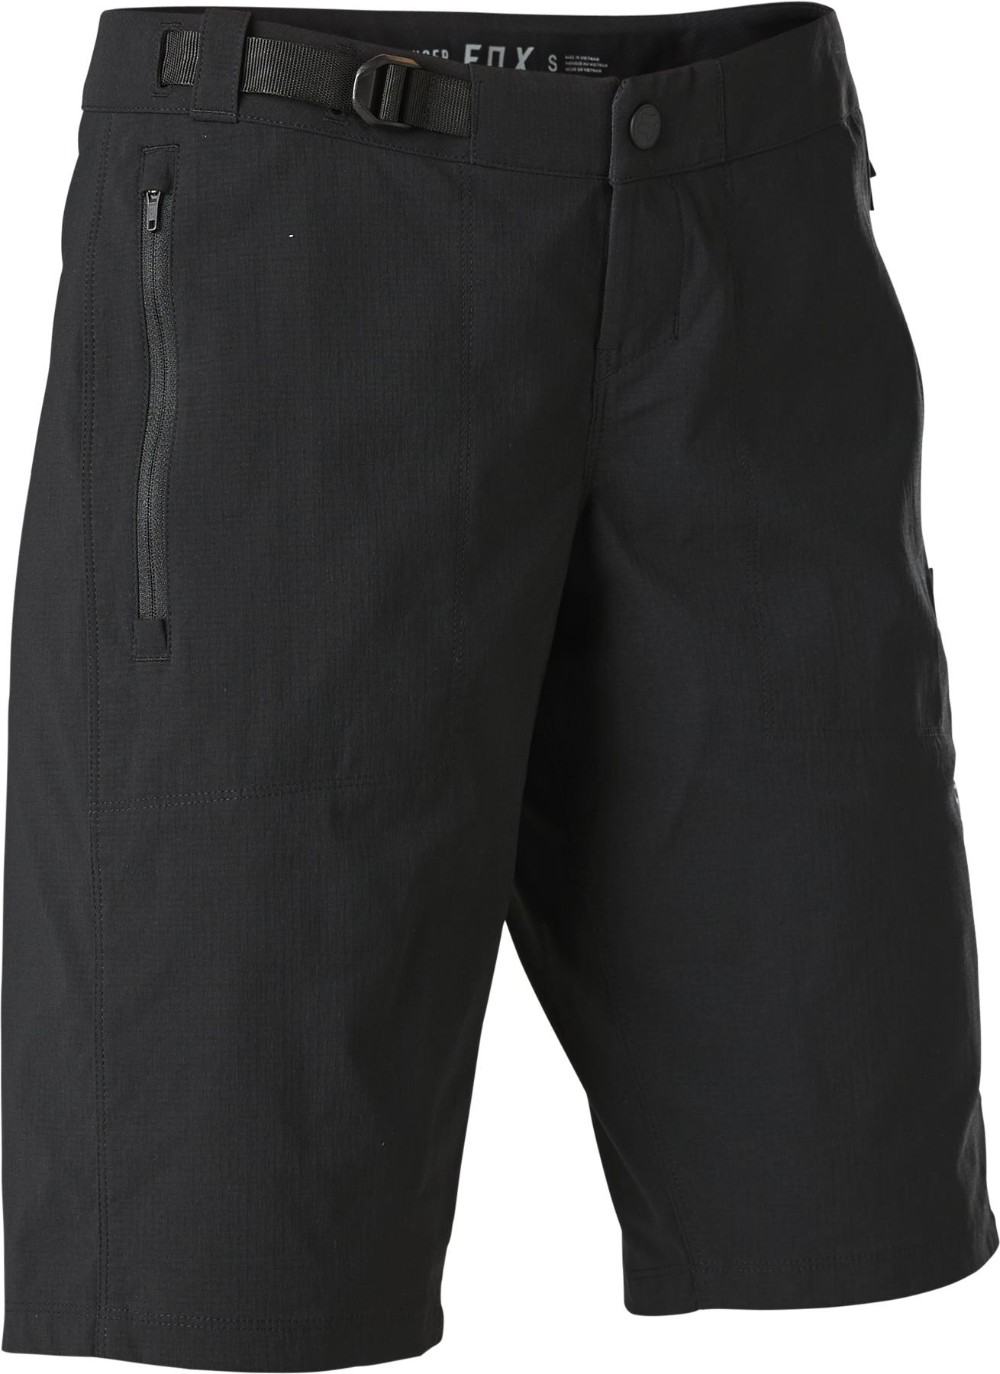 Ranger Womens Cycling Shorts with Liner image 0